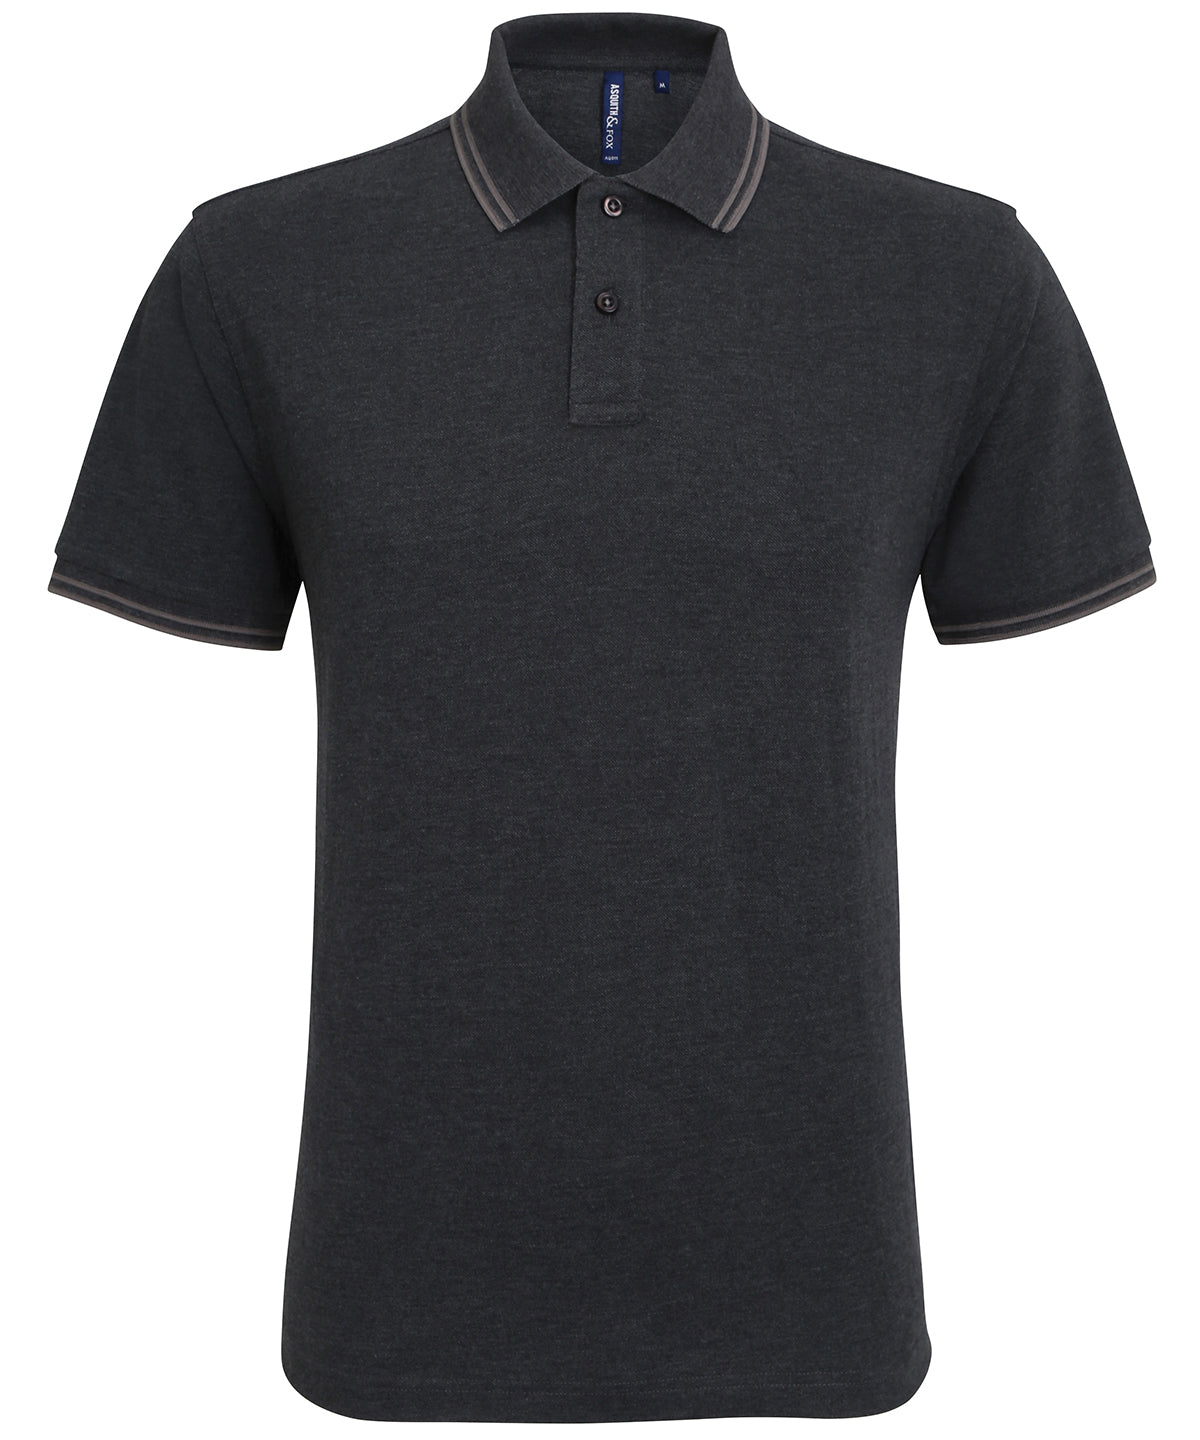 Personalised Polo Shirts - Black Asquith & Fox Men's classic fit tipped polo